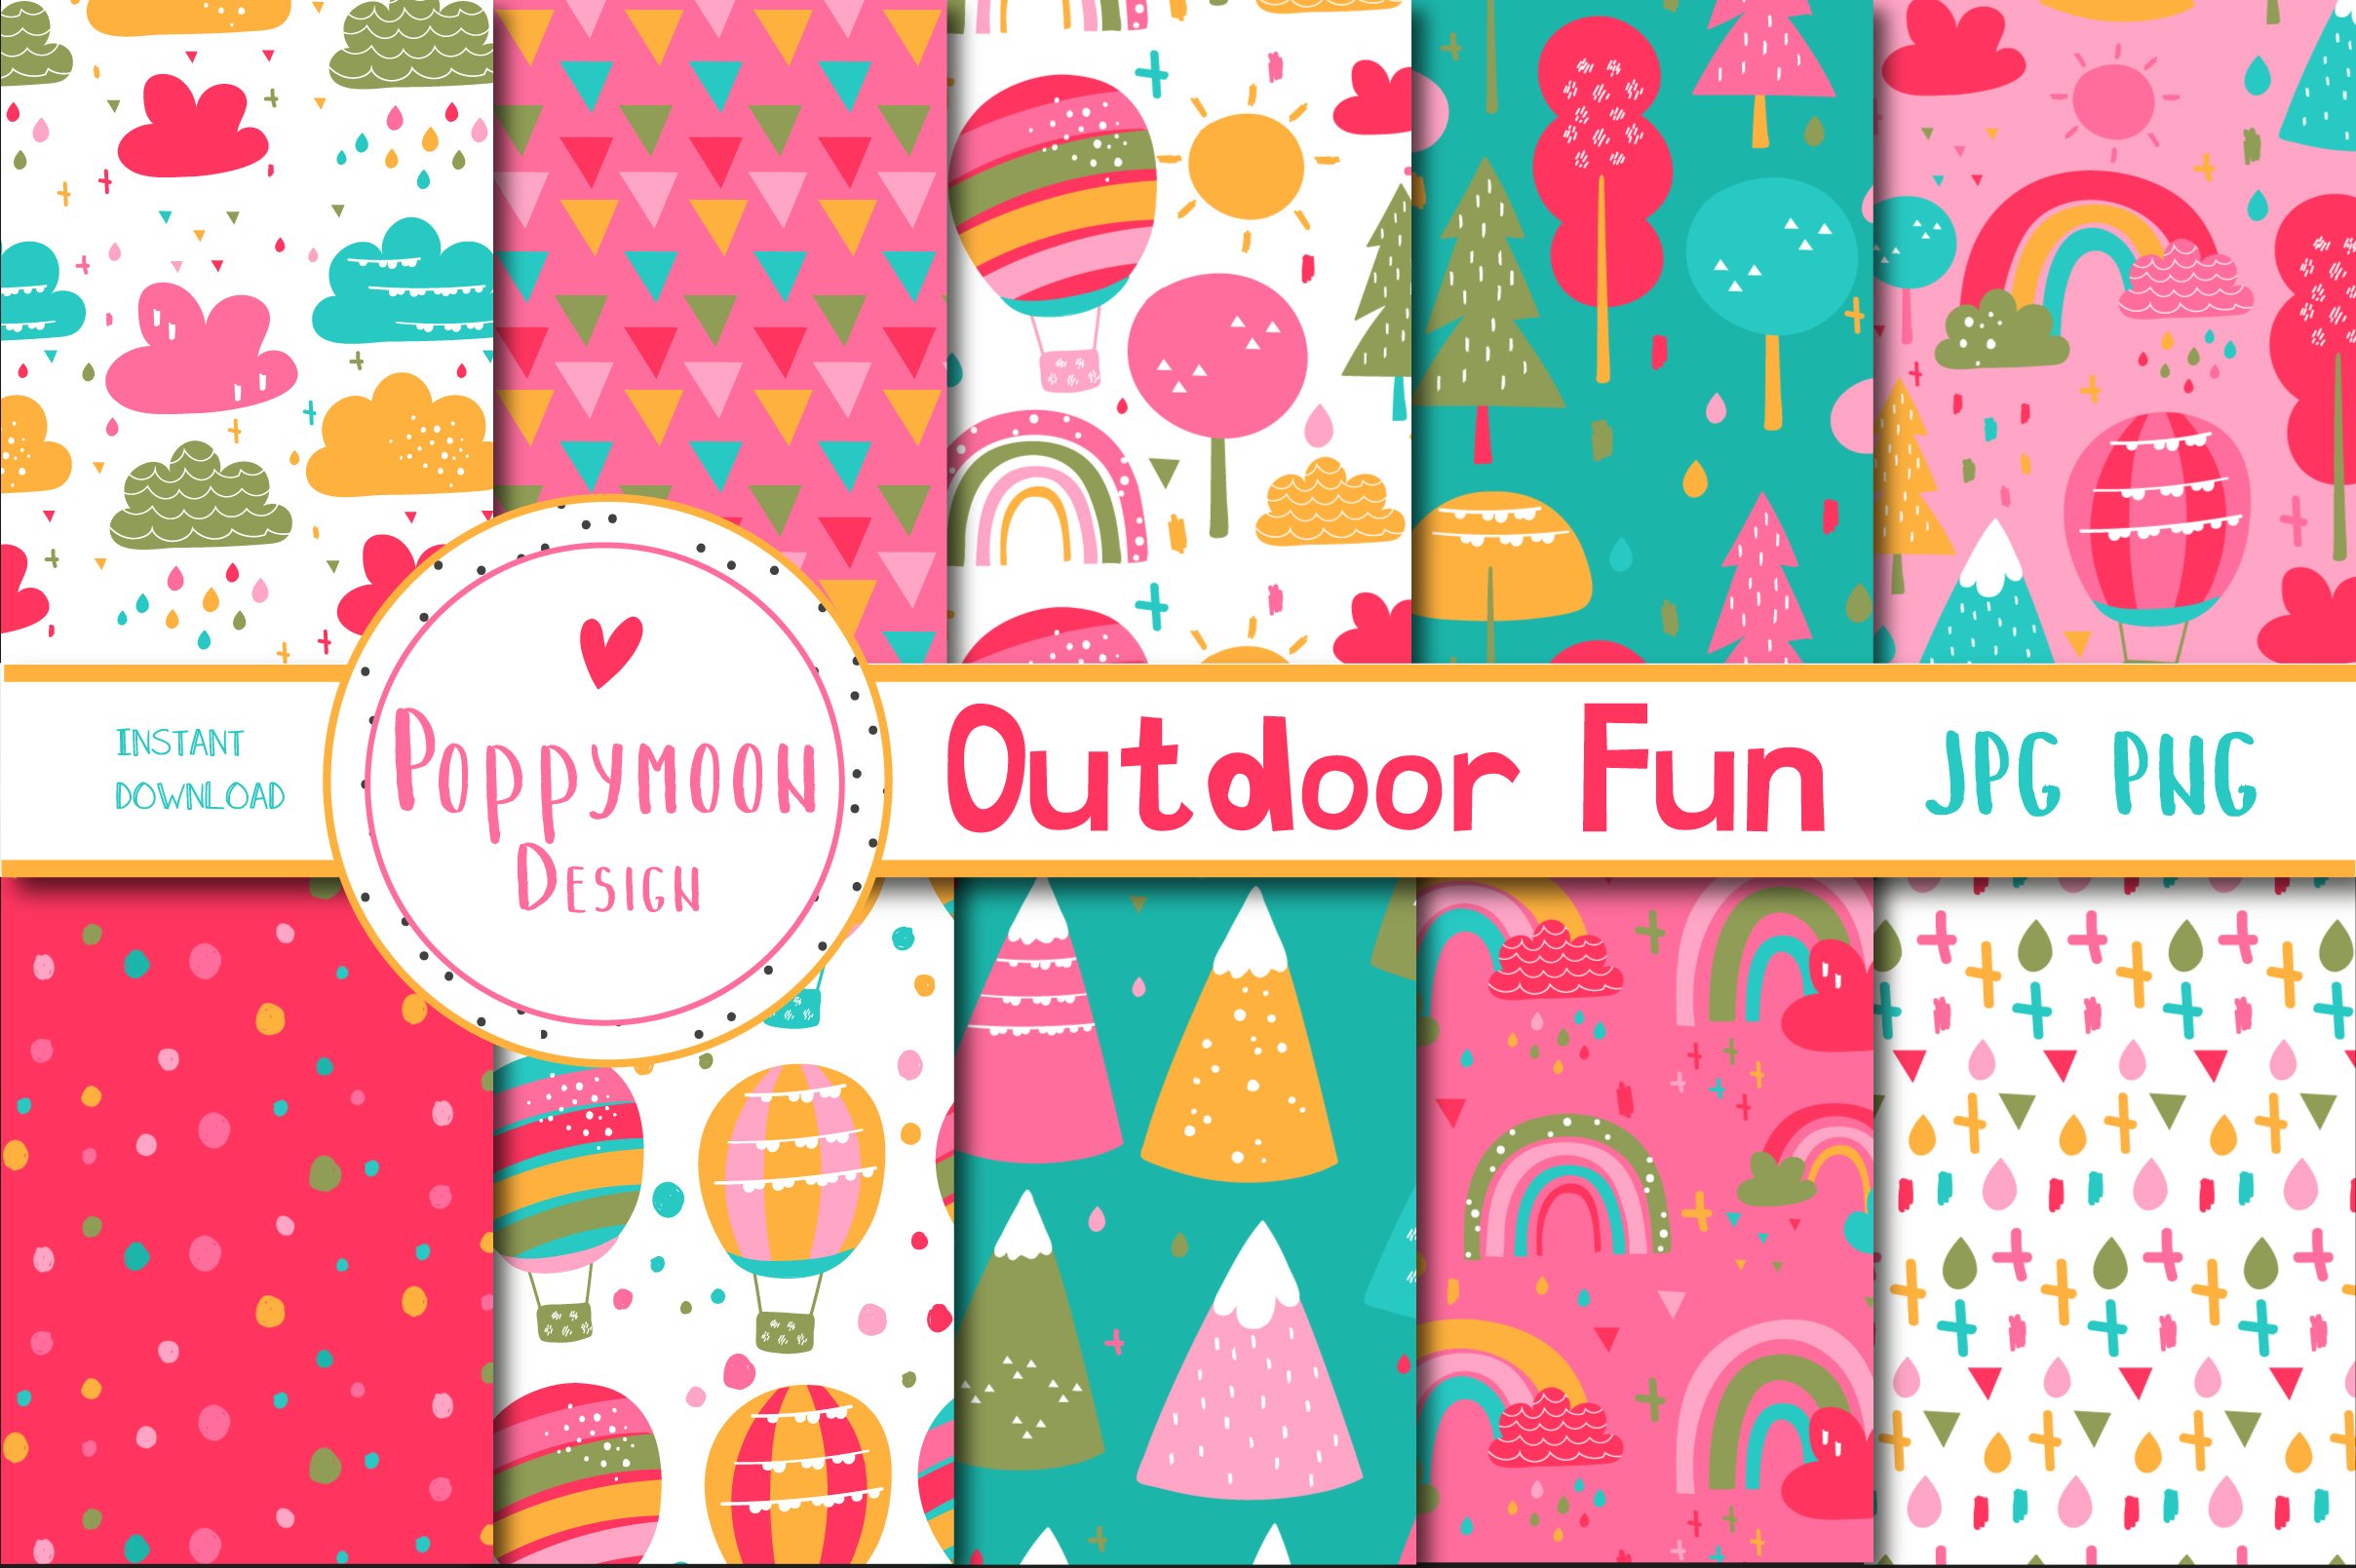 Outdoor fun paper cover image.